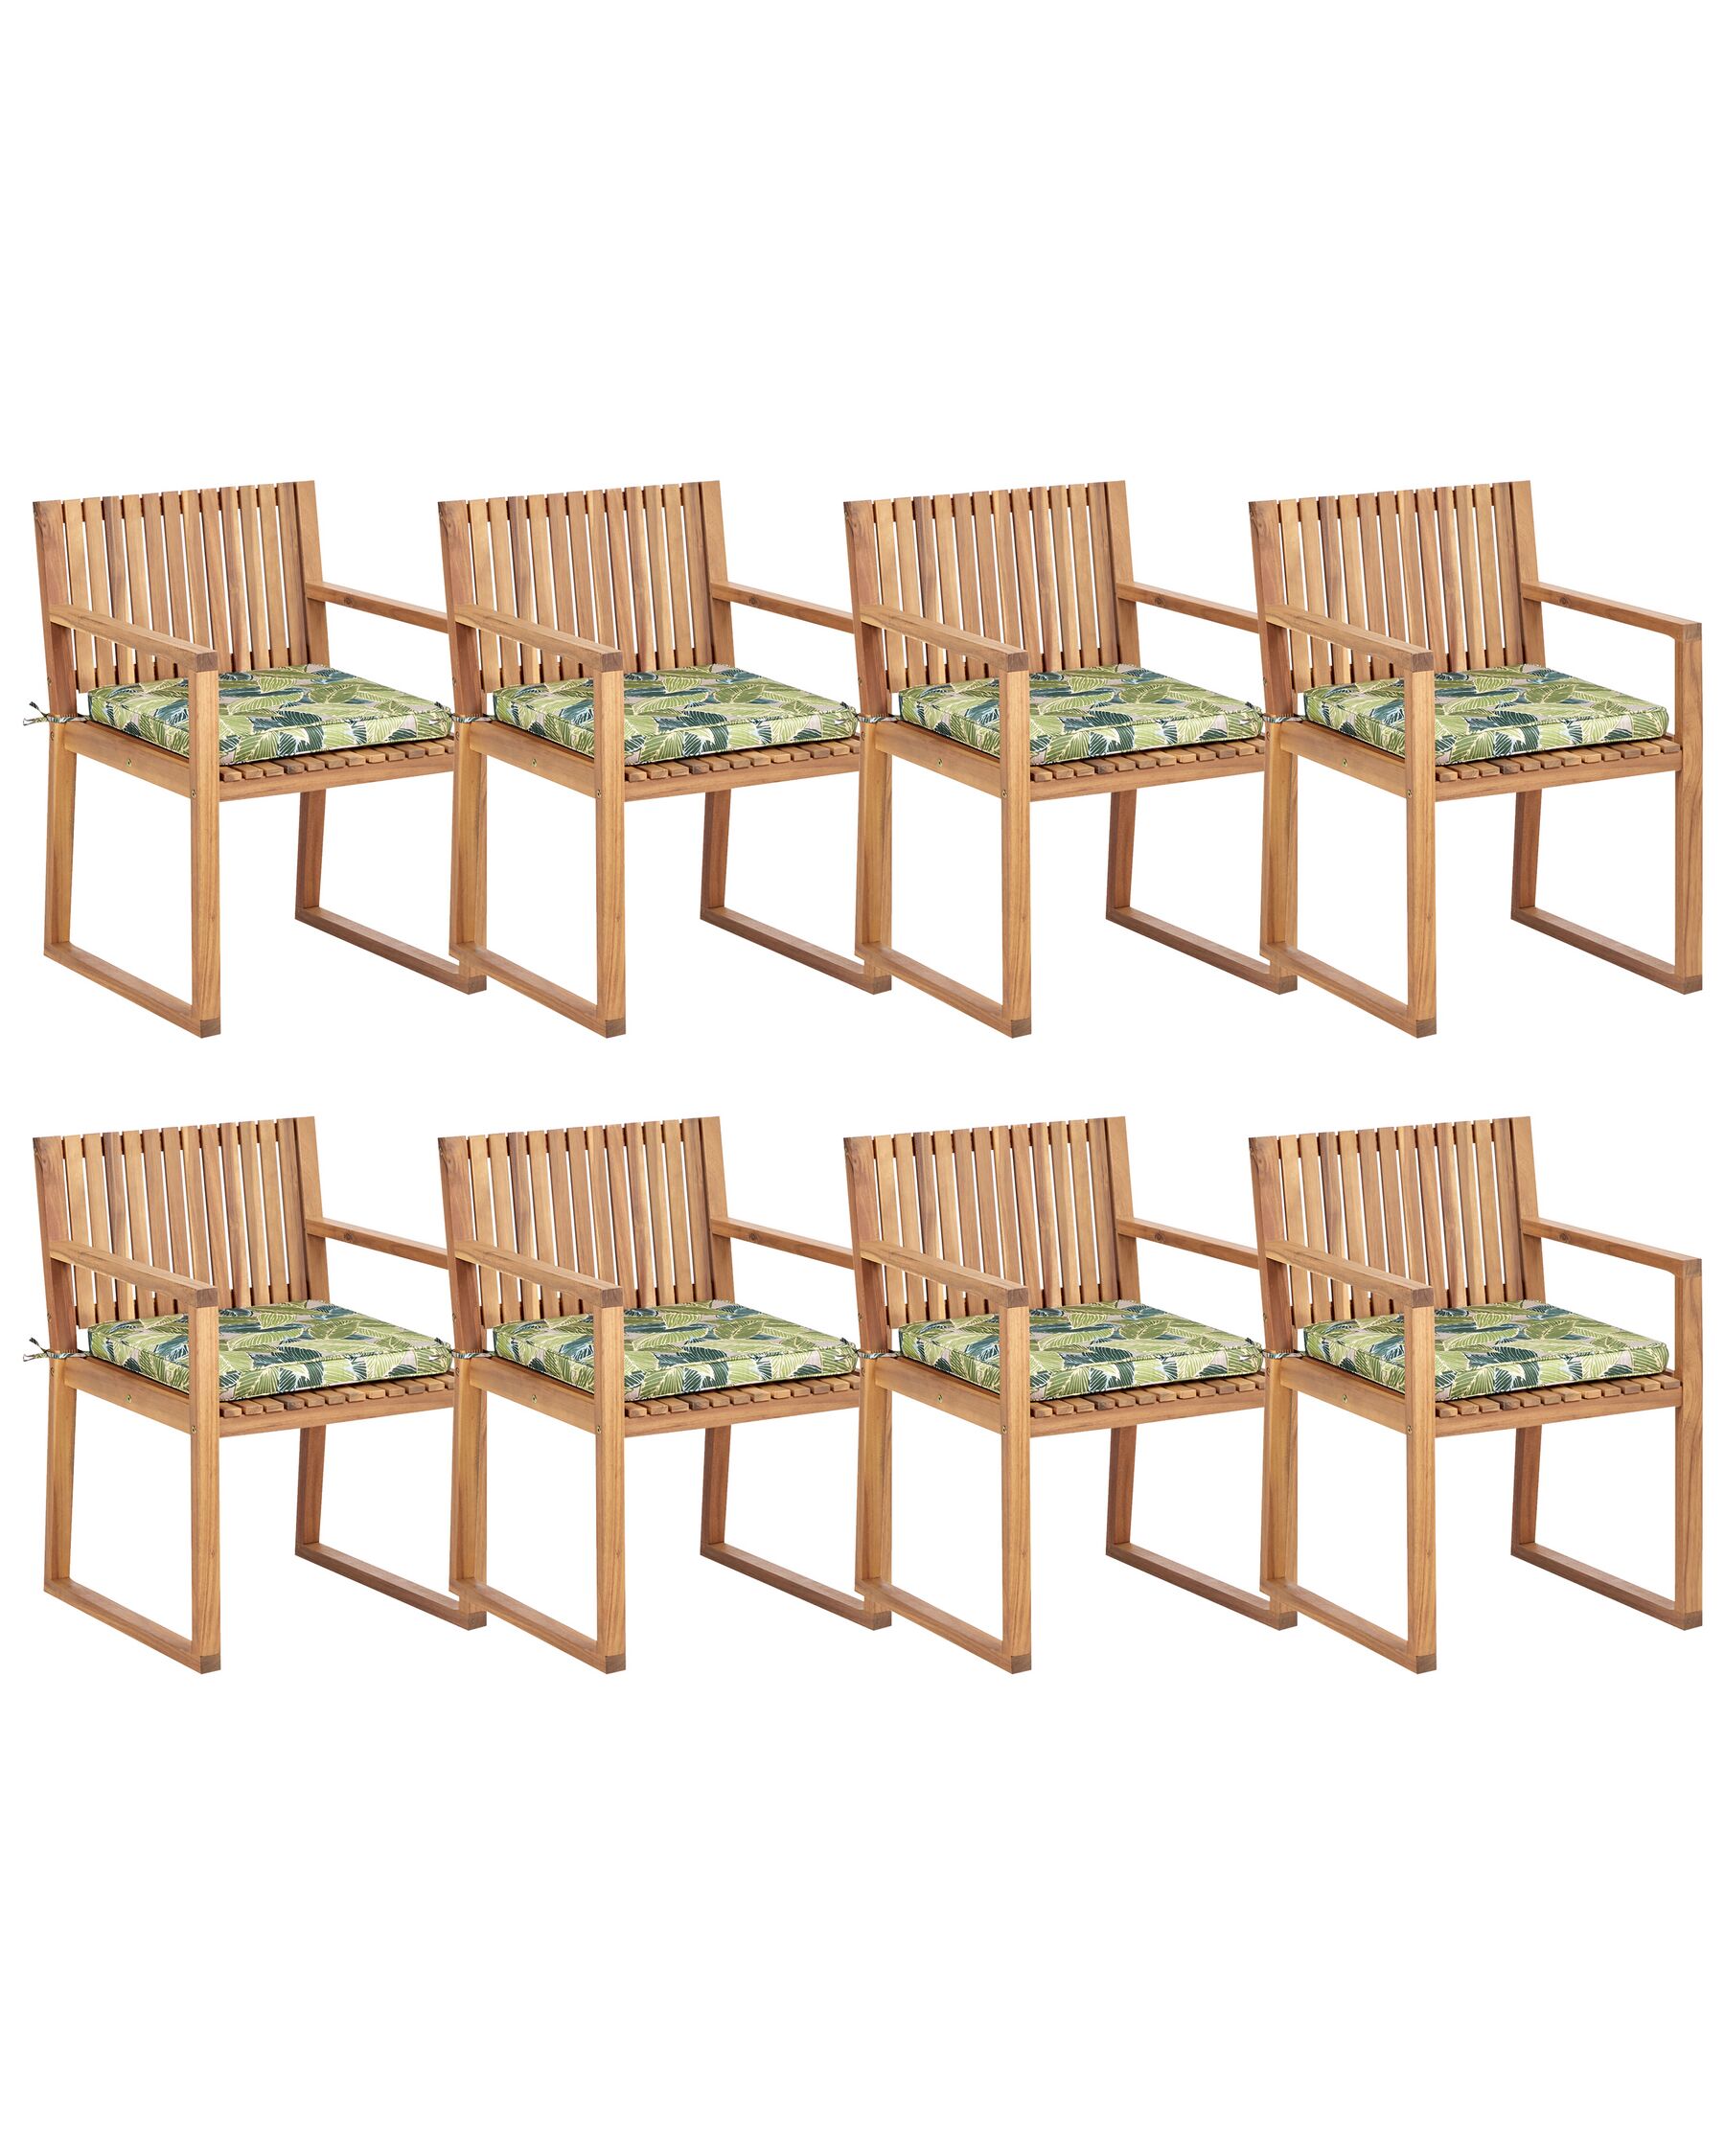 Set of 8 Certified Acacia Wood Garden Dining Chairs with Leaf Pattern Green Cushions SASSARI II_923944